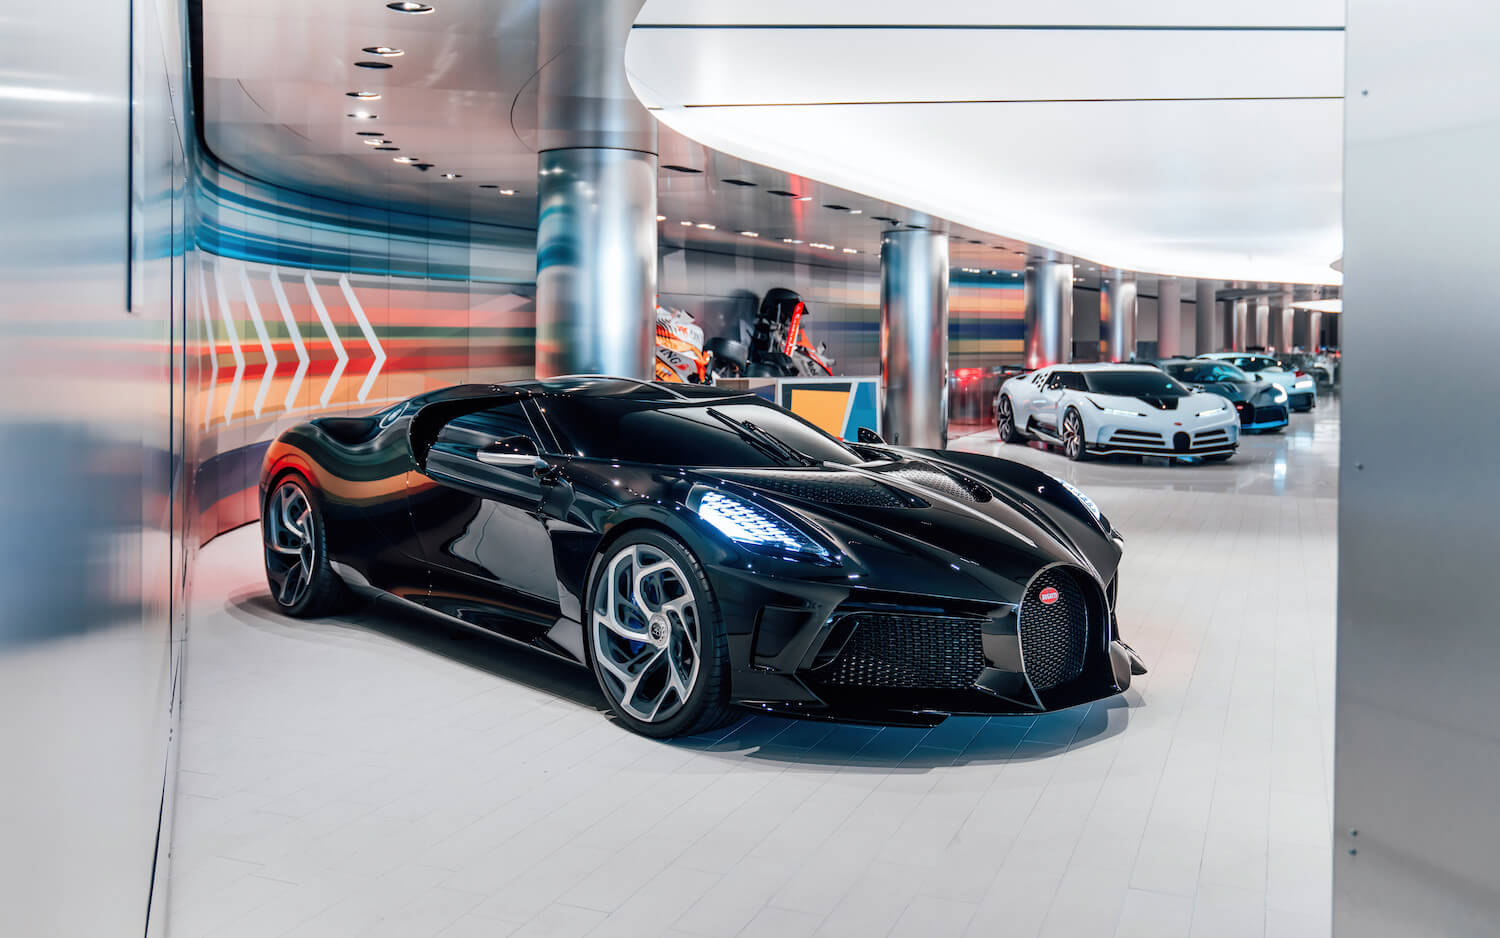 The Bugatti collection of the Prince of Monaco welcomes La Voiture Noire, a Centodieci, a Divo, a Chiron Pur Sport “Grand Prix” and the W16 Mistral.